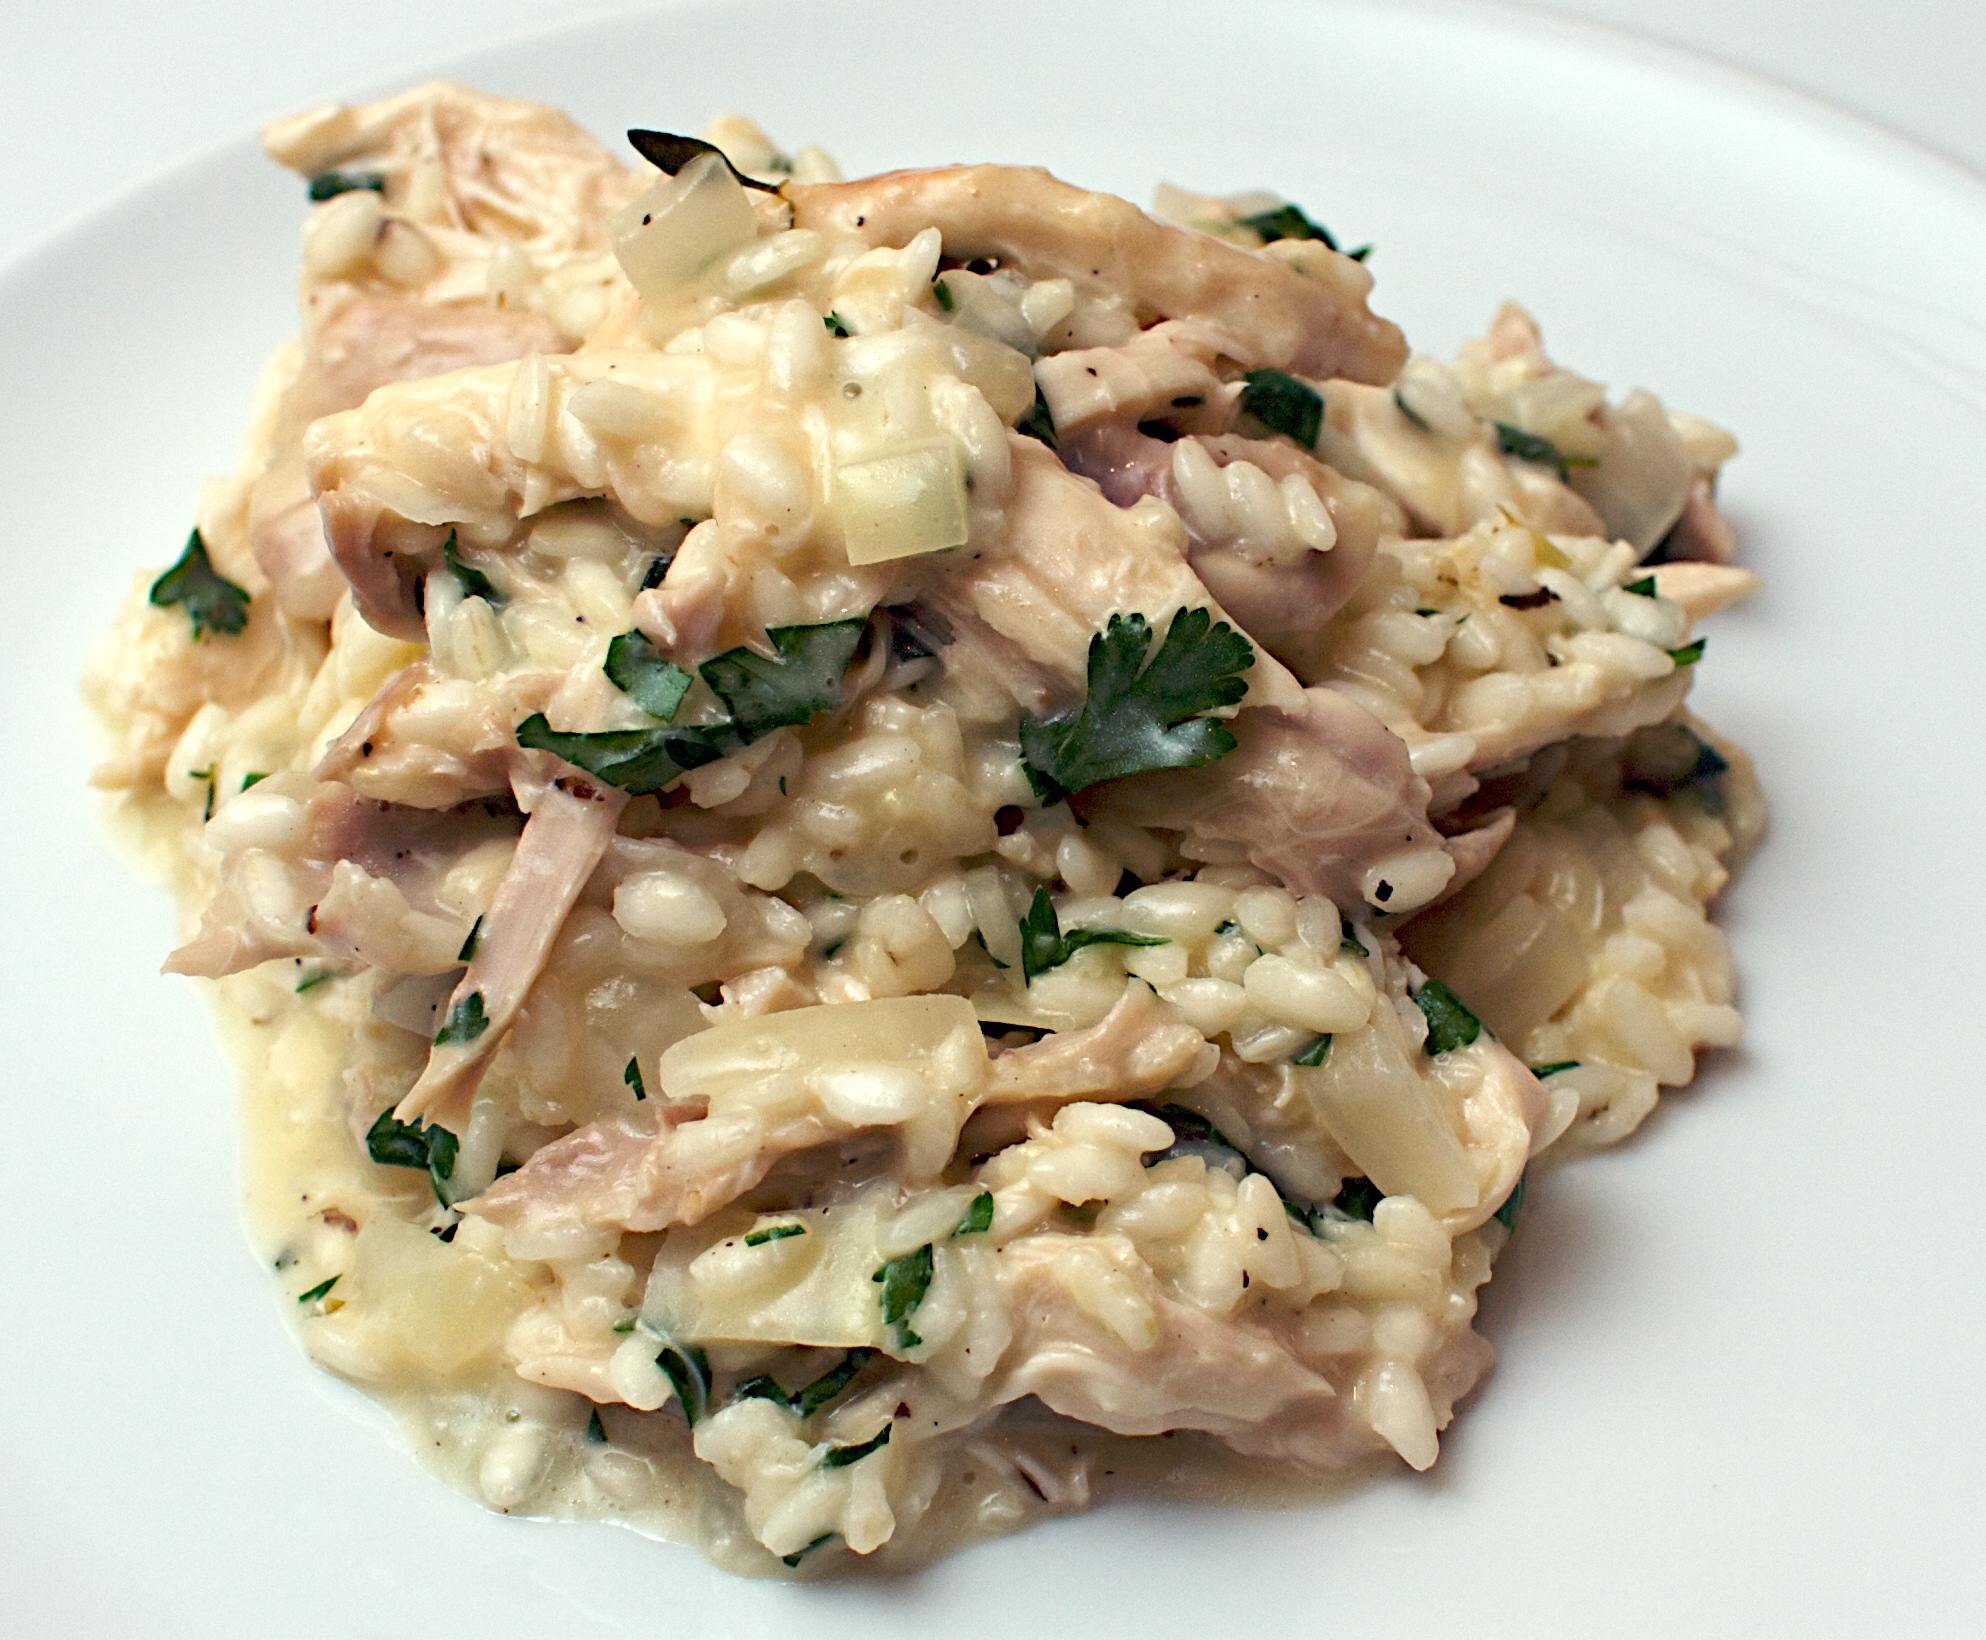 Creamy Roast Chicken Risotto Jono Jules Do Food Wine with The Most Incredible along with Stunning roast chicken recipe nigel slater intended for Motivate